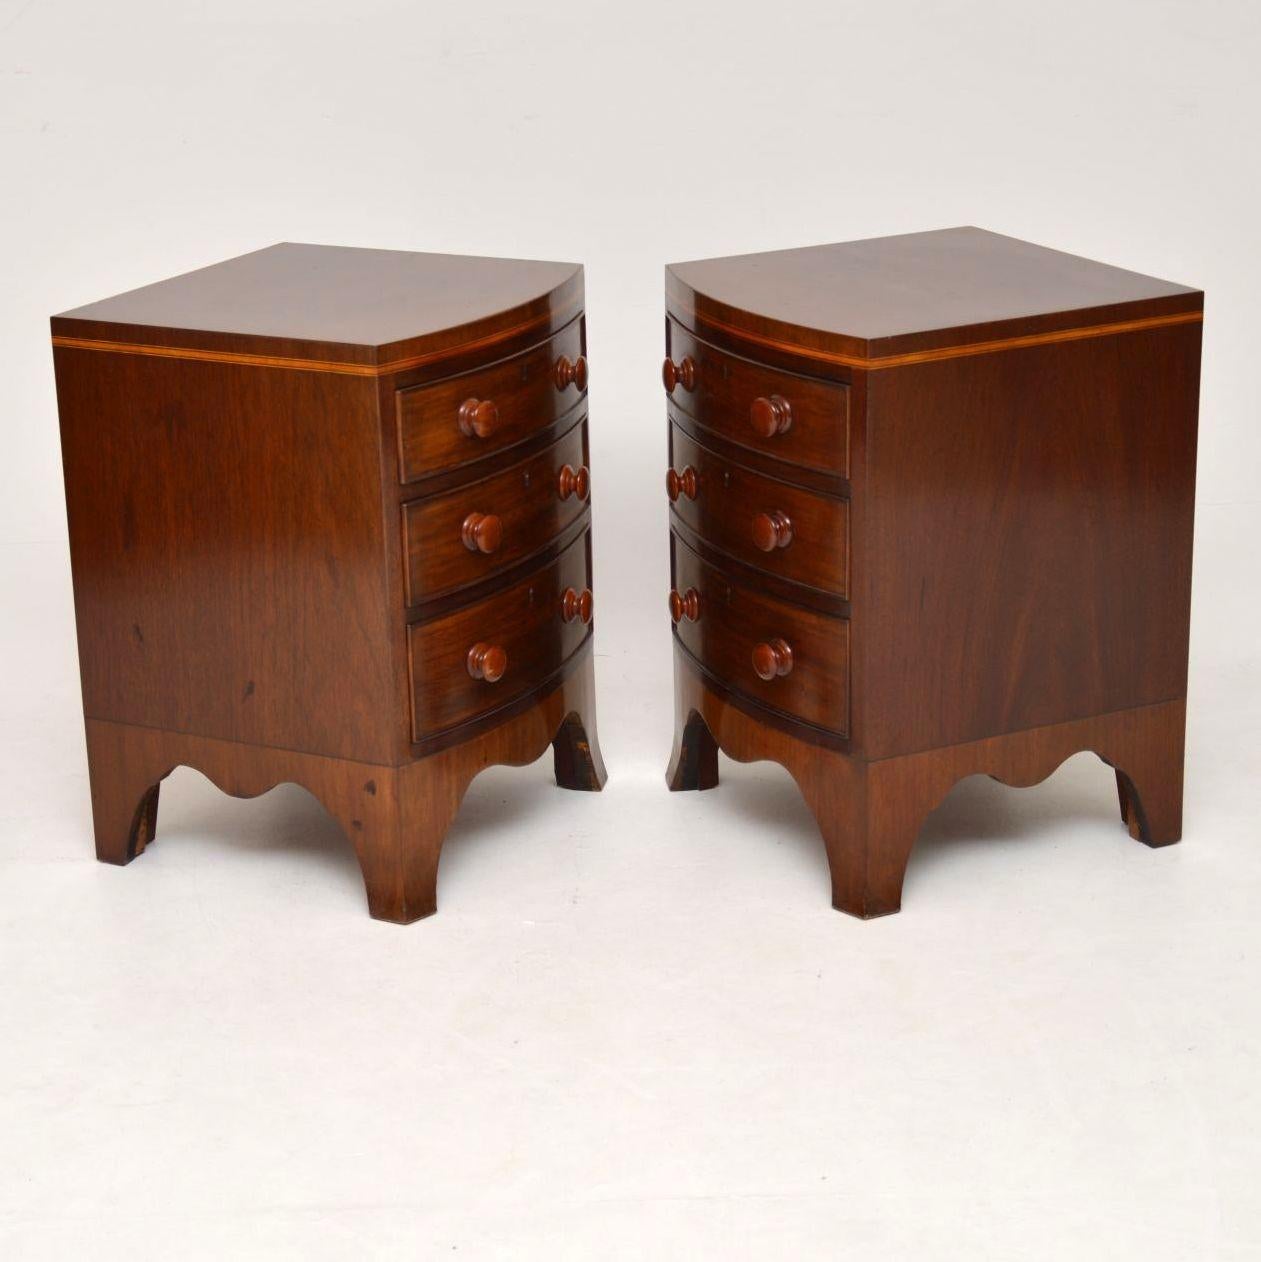 George III Pair of Antique Georgian Style Mahogany Bedside Chests